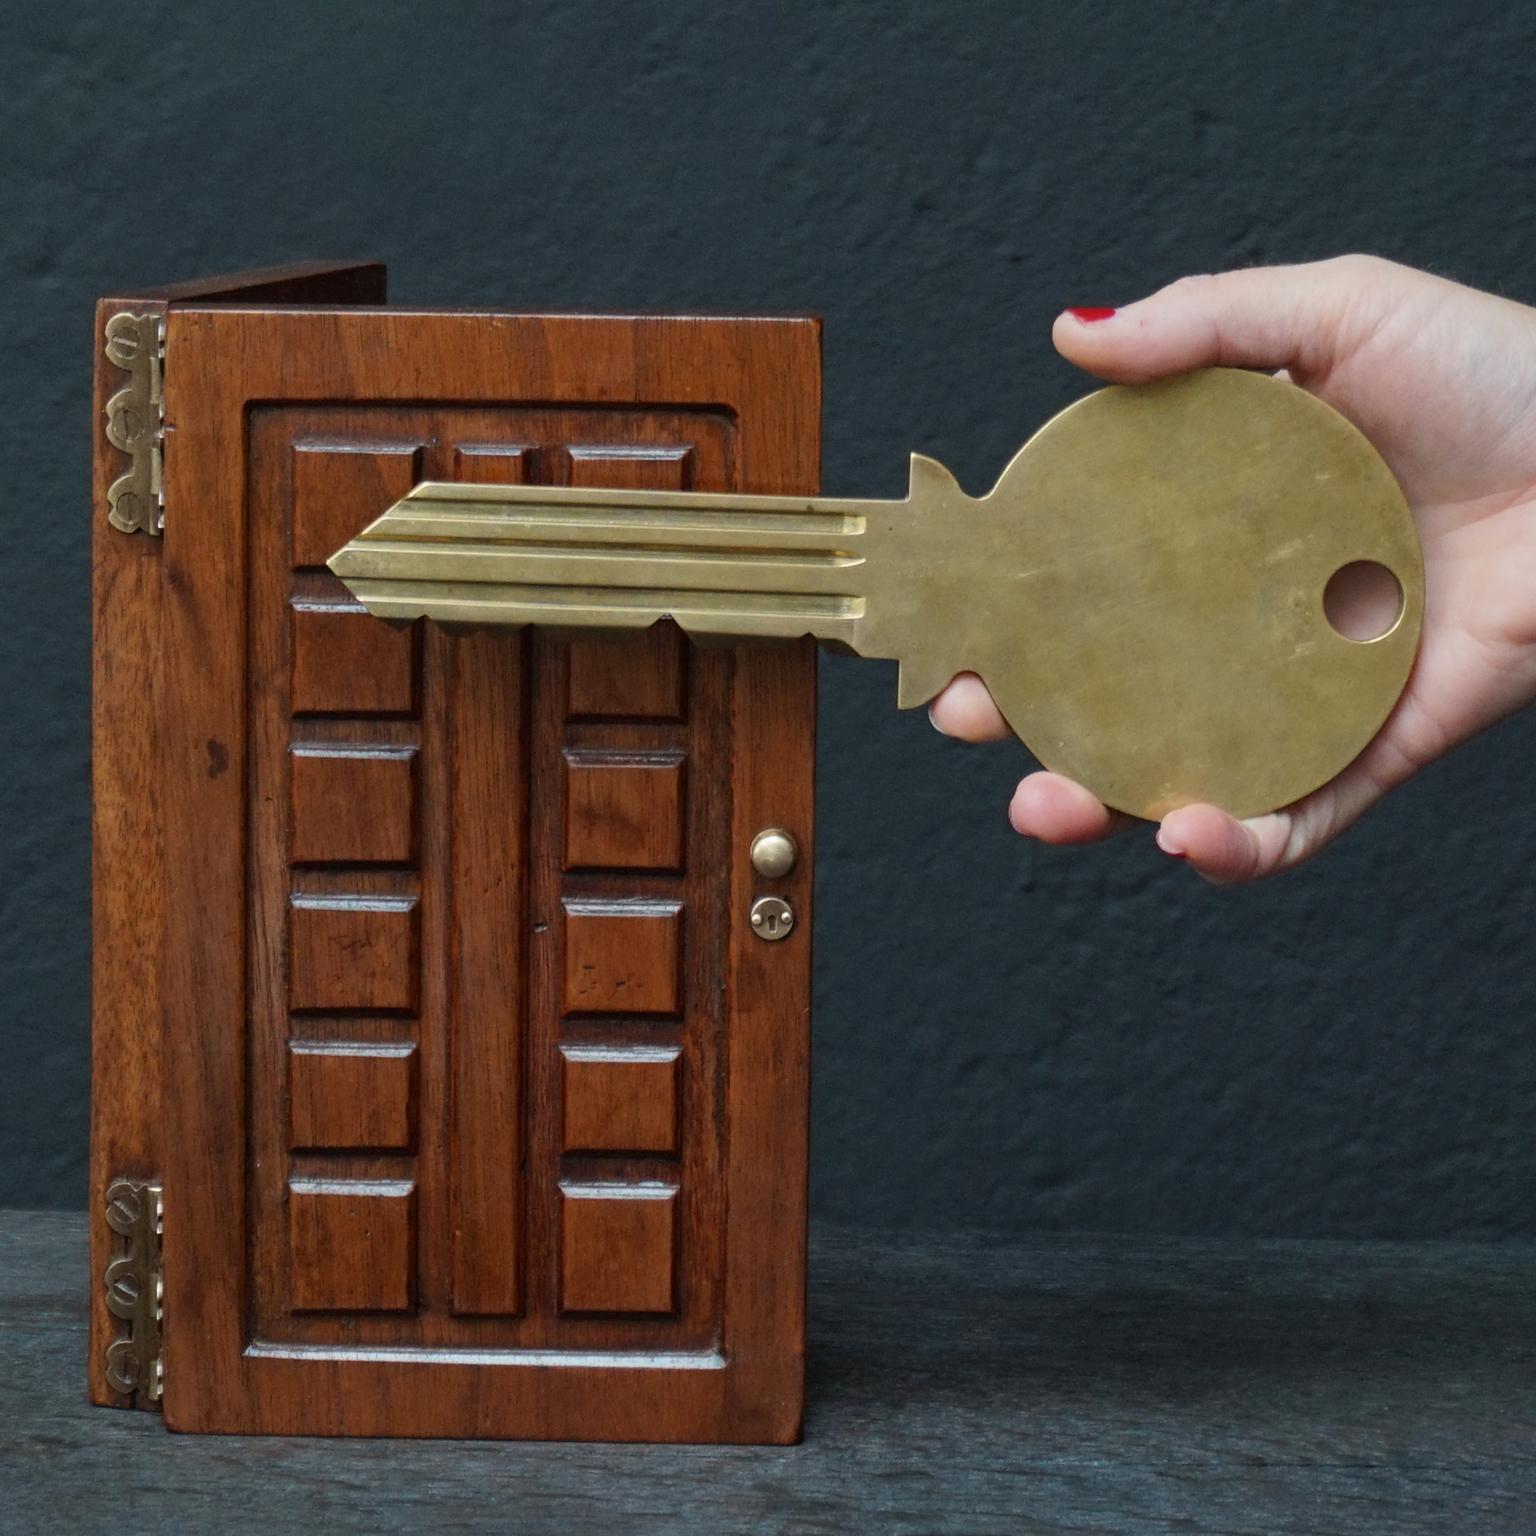 Very pretty and heavy vintage brass 'front door' key in a box made of walnut wood, shaped as a flat door with little brass hinges, little fake keyhole and doorknob.
I have no idea what or who this novelty object was originally made for.
But now it